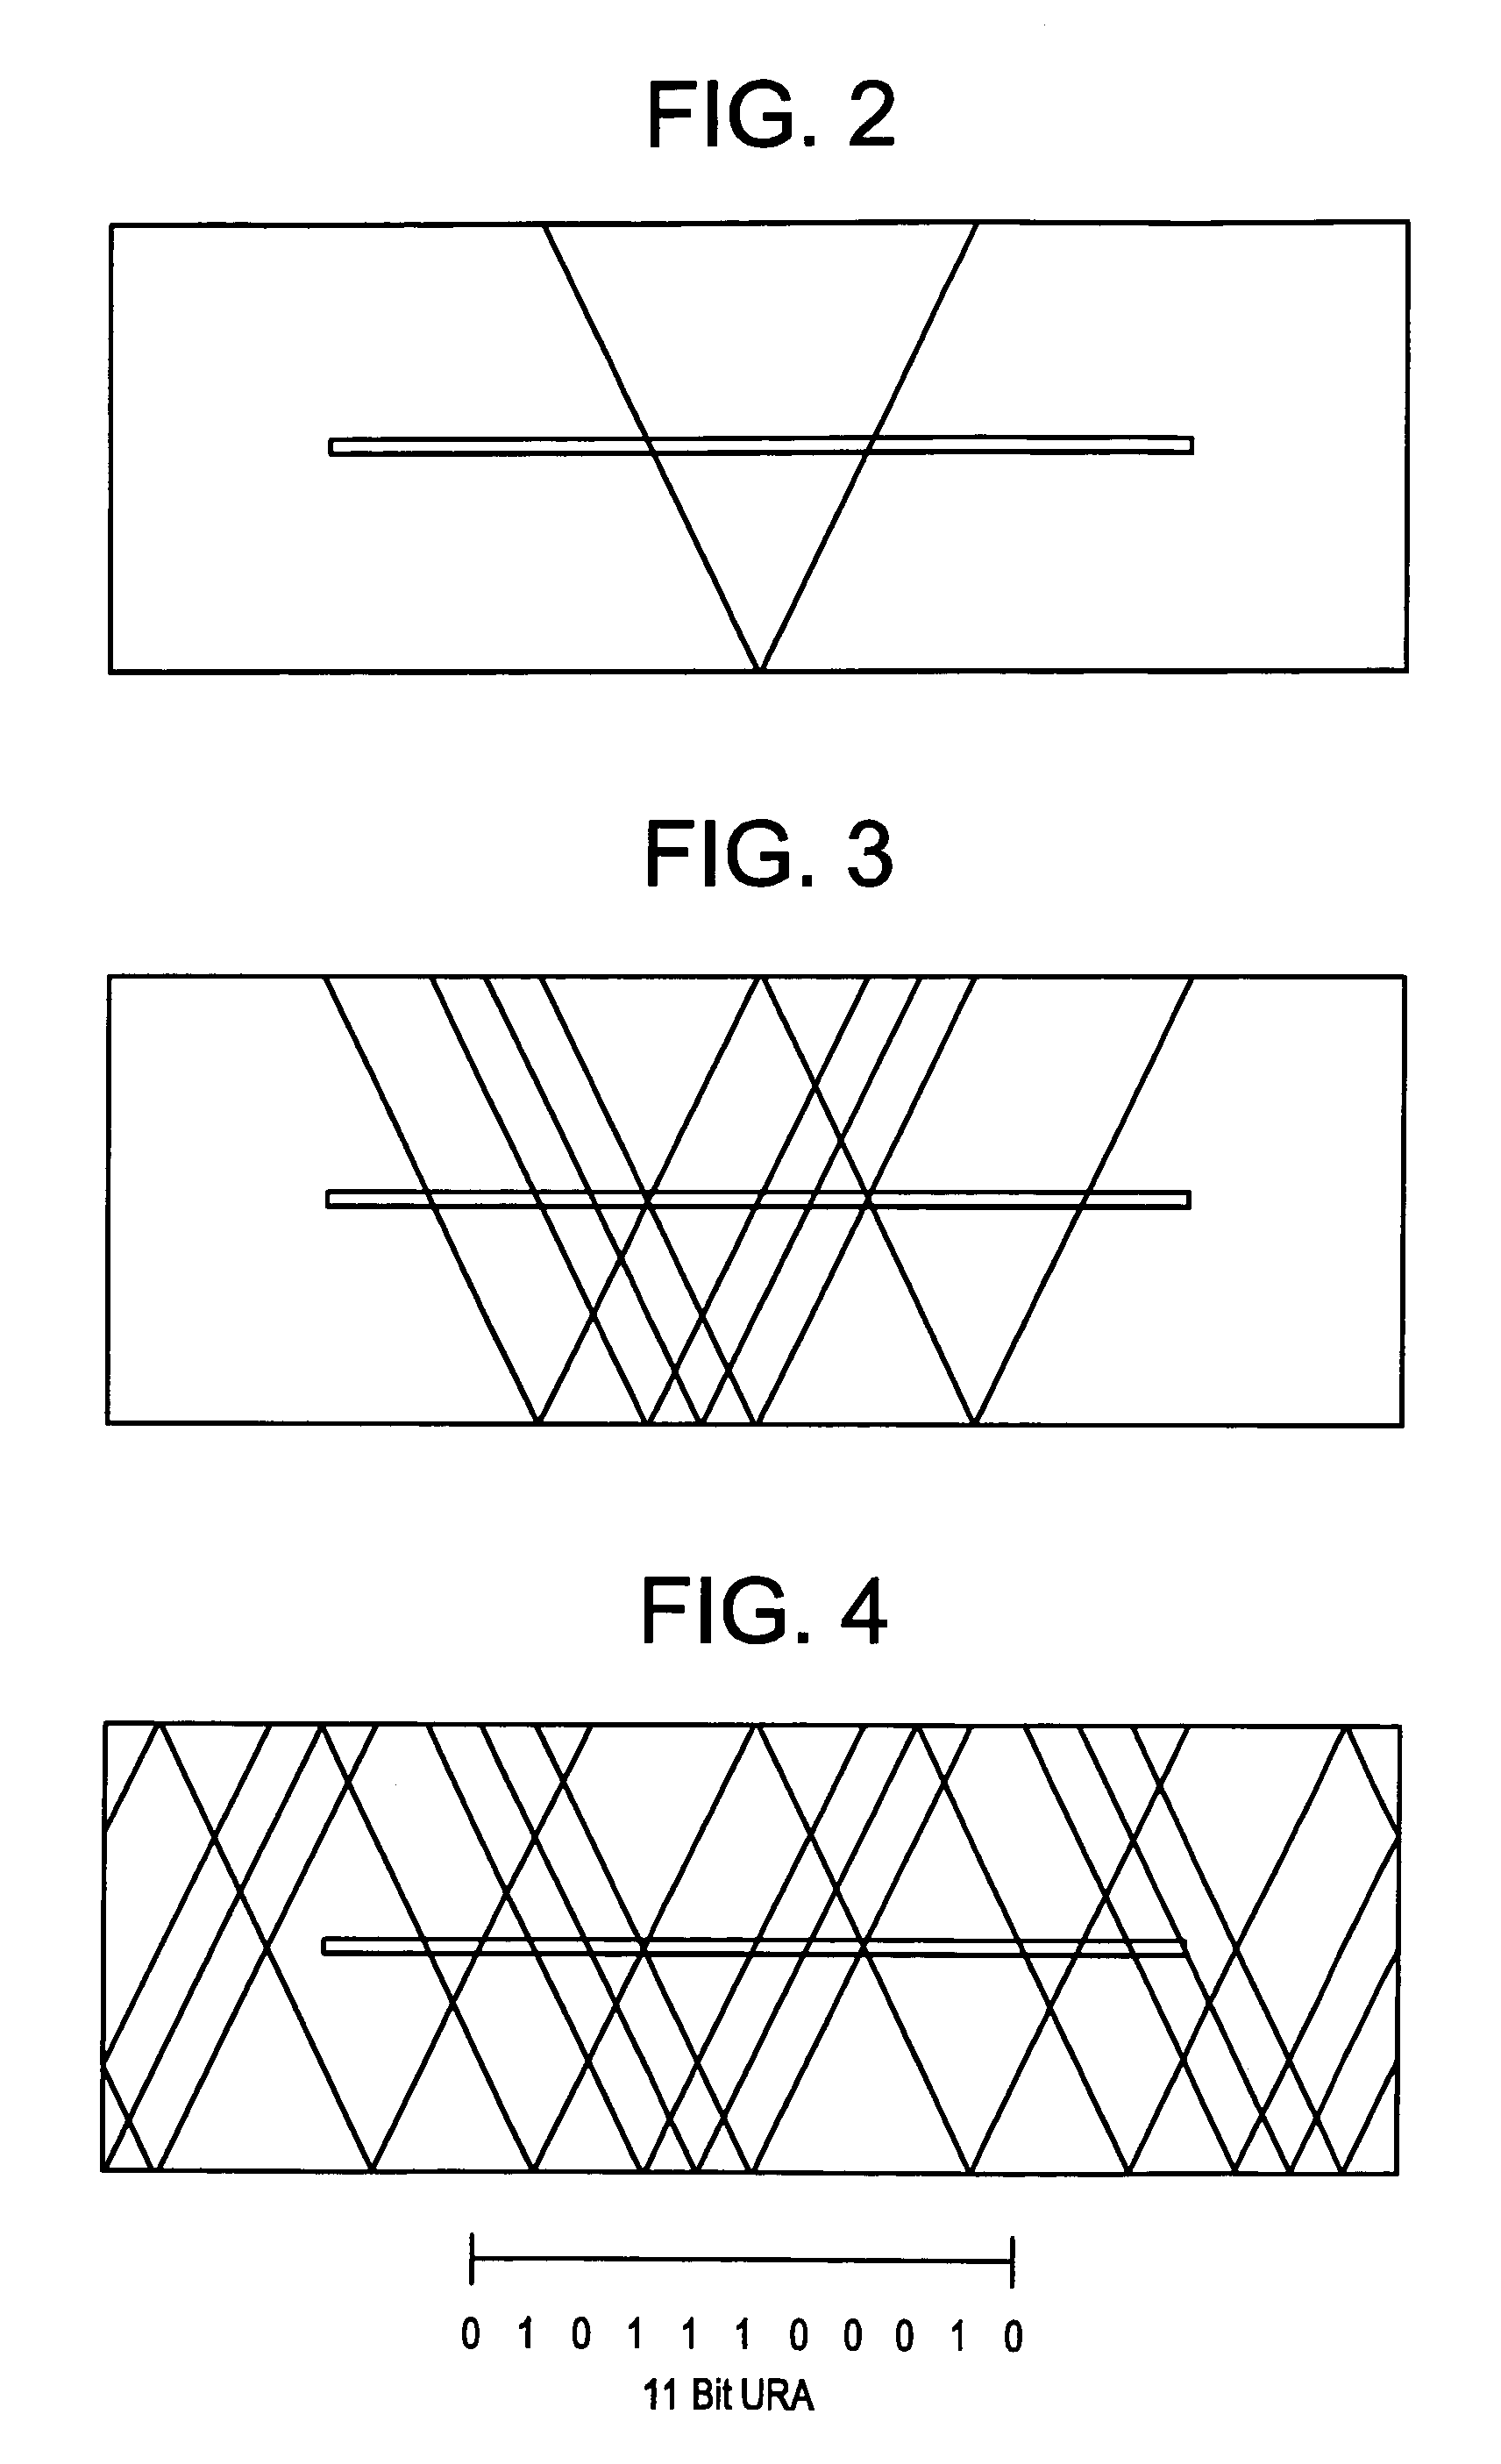 Sensor for determining the angular position of a radiating point source in two dimensions